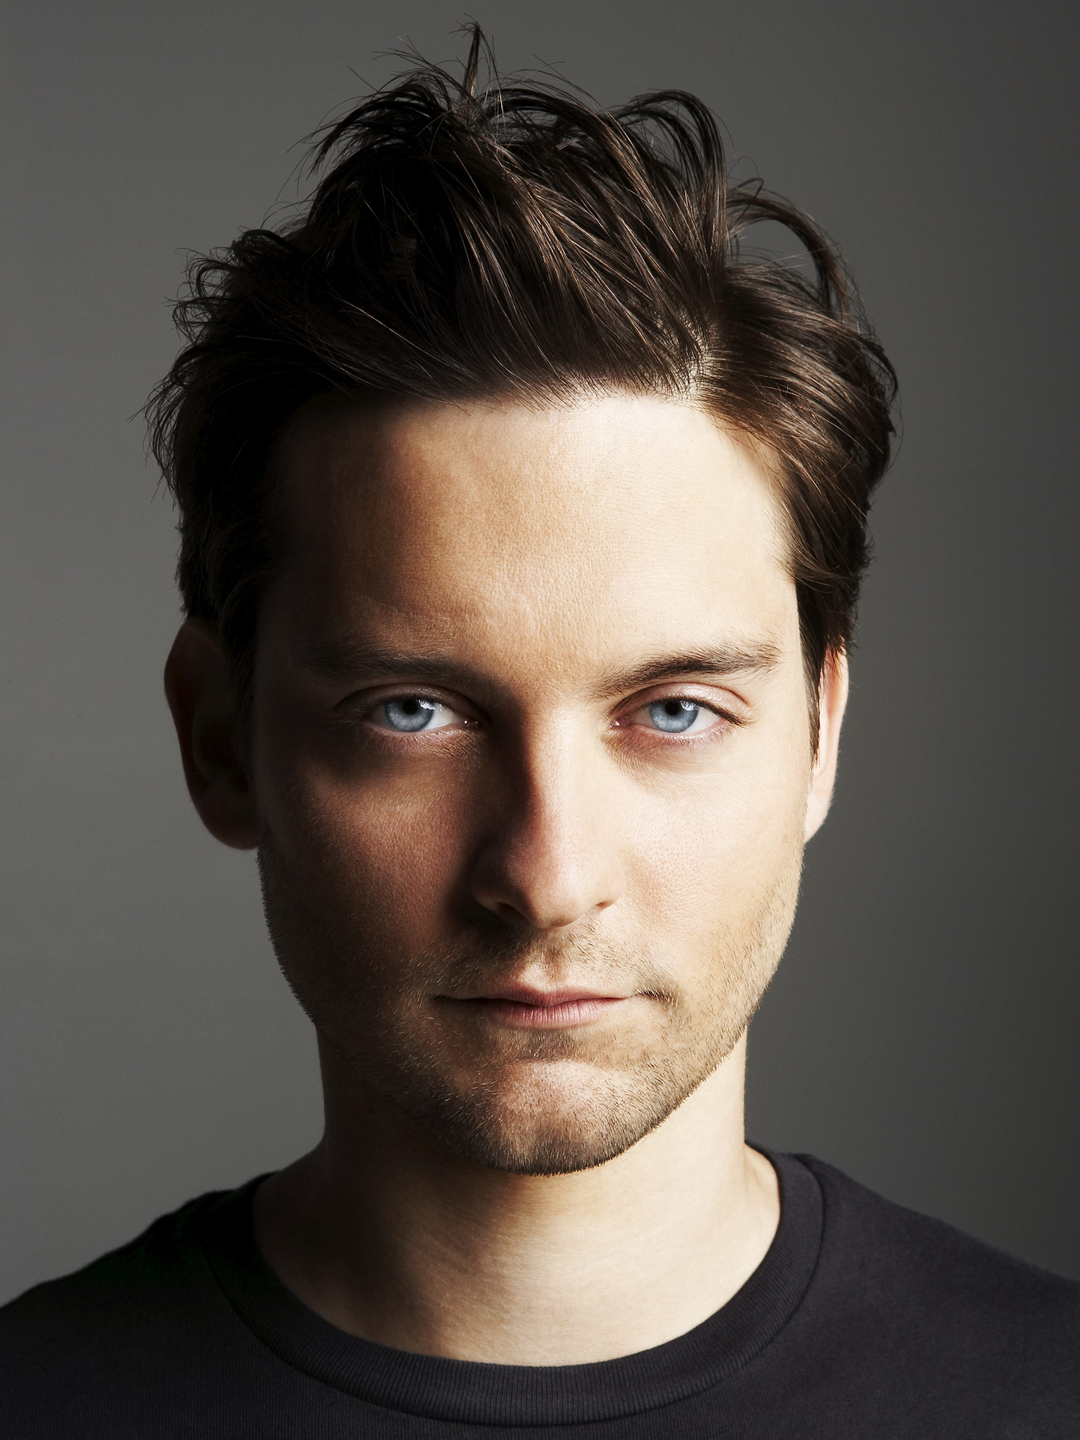 Tobey Maguire young pics